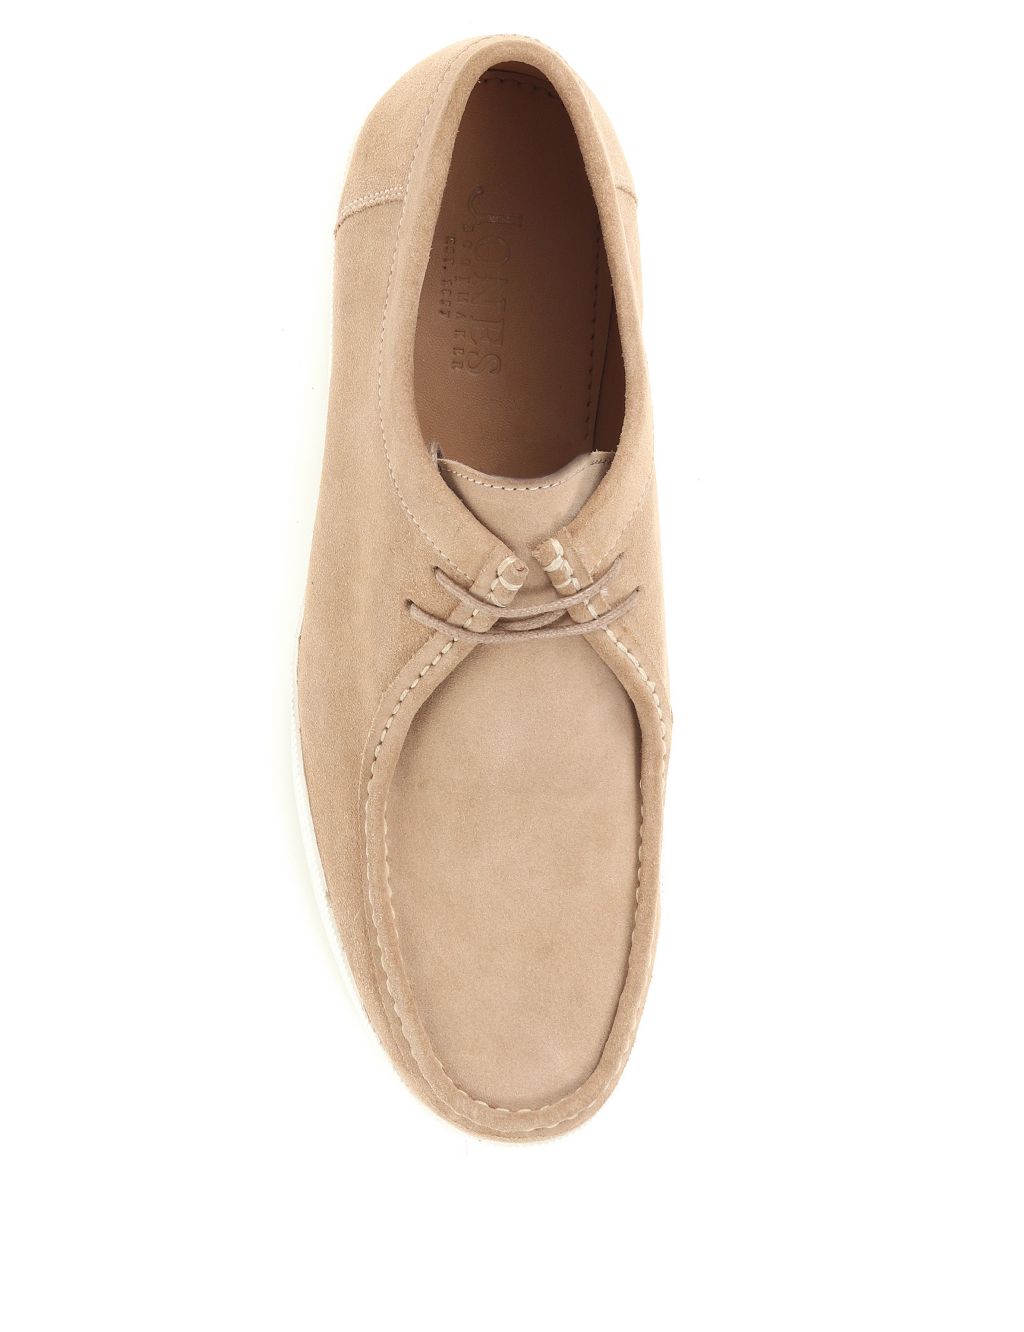 Suede Lace Up Casuals image 4